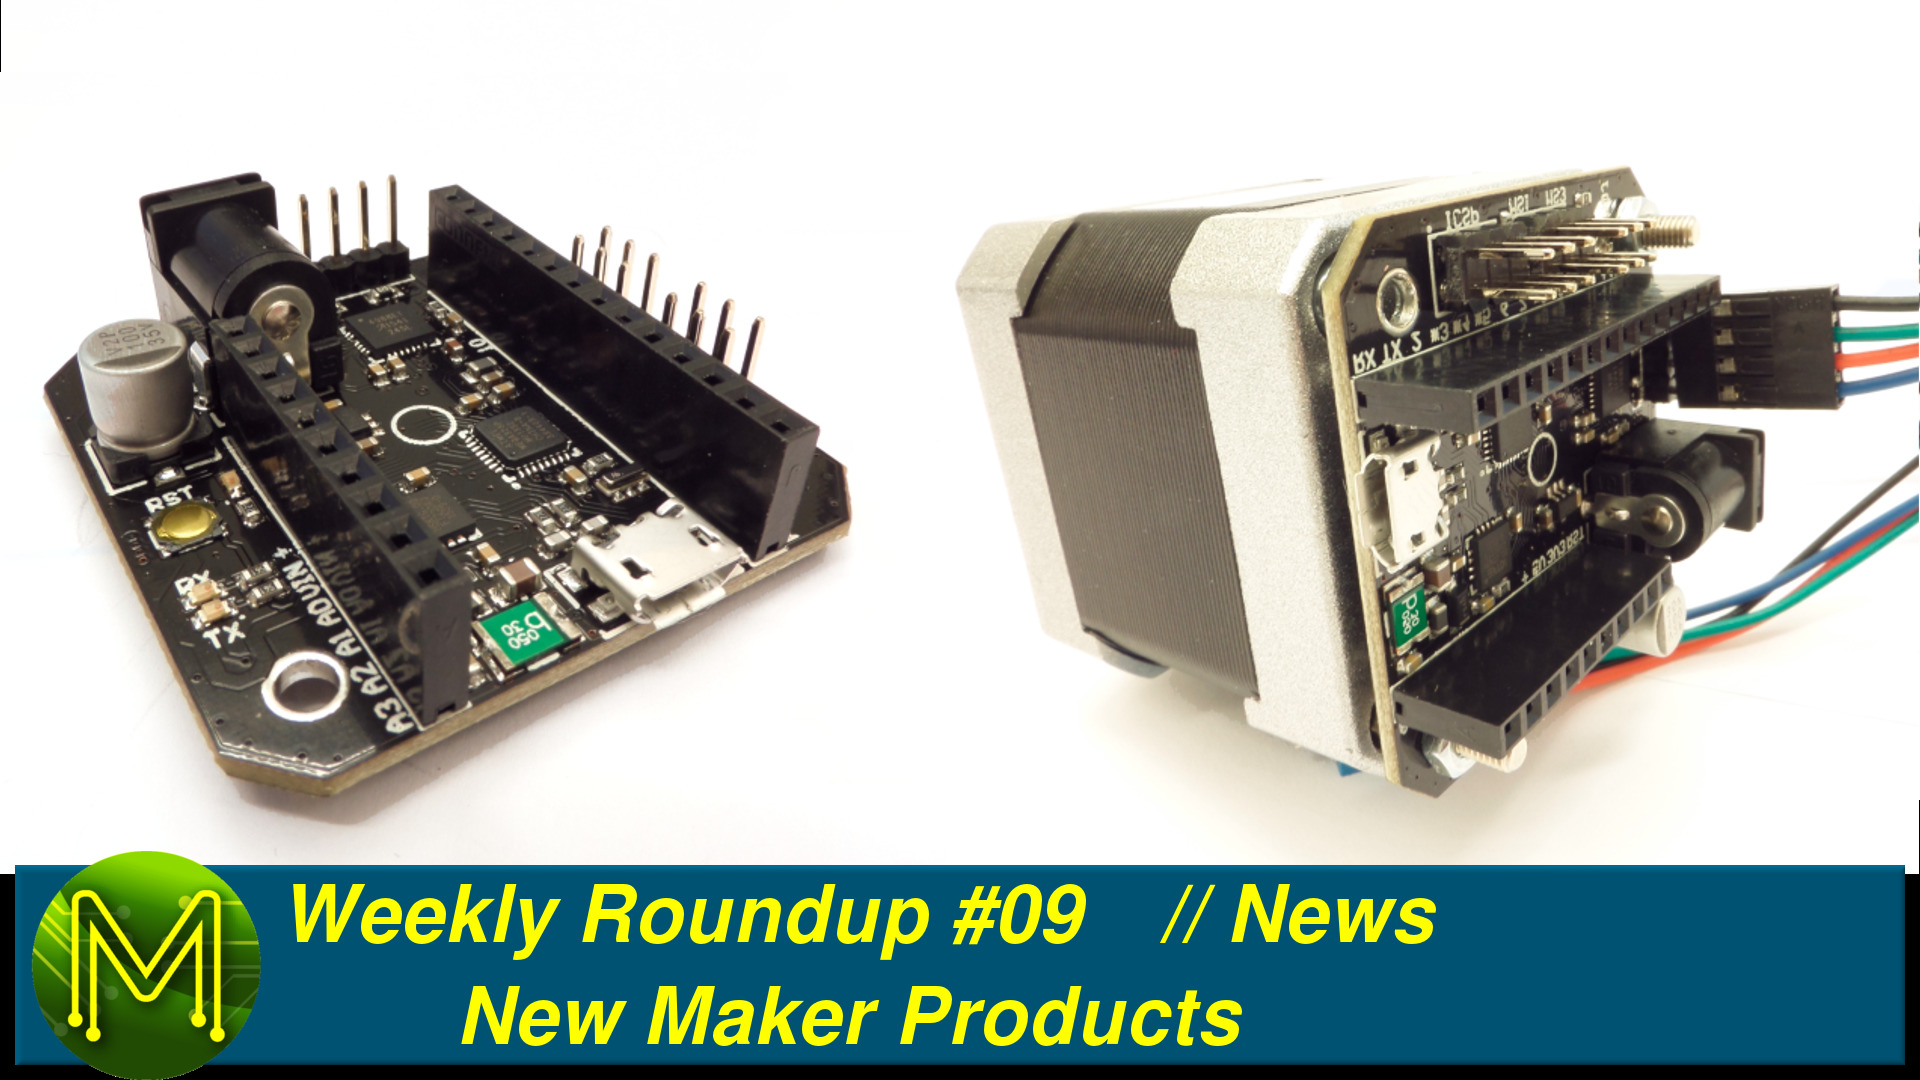 Weekly Roundup #09 - New Maker Products // News